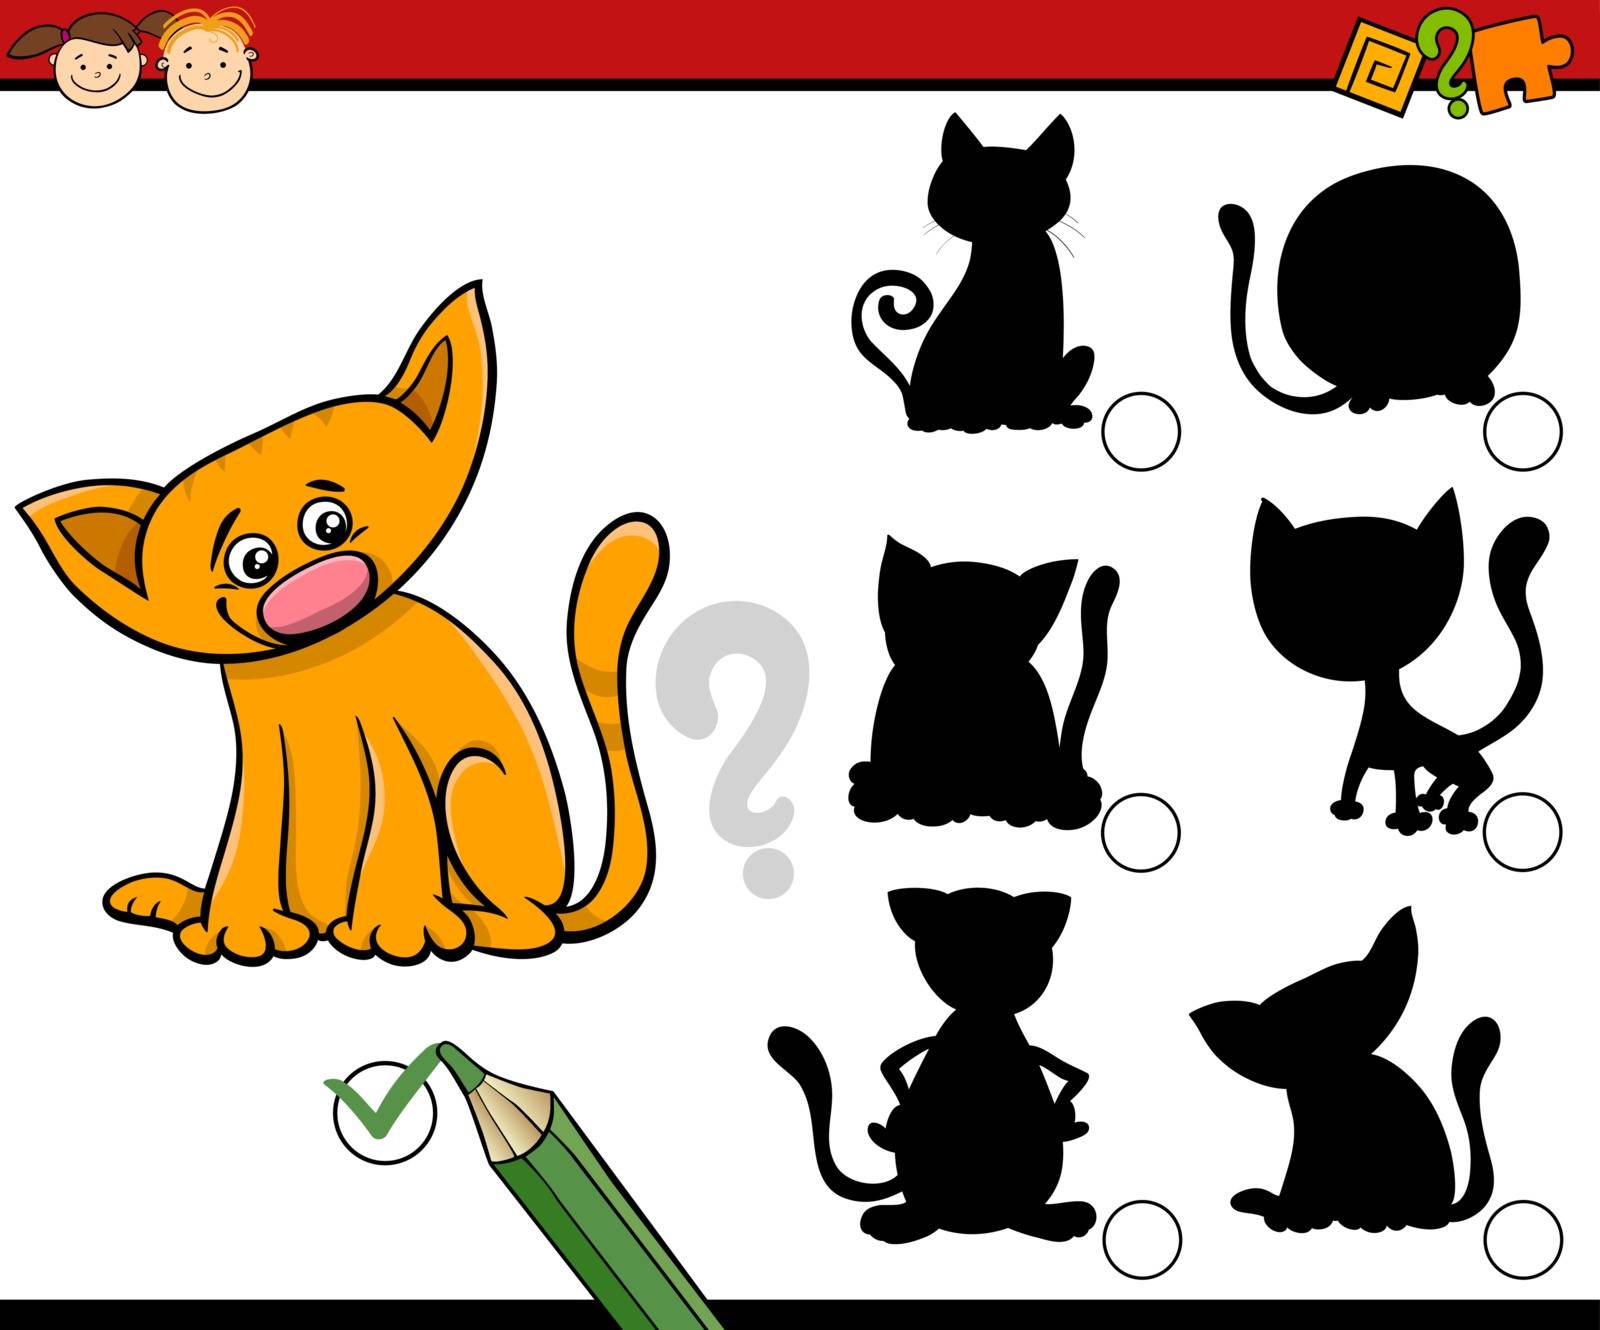 Cartoon Illustration of Educational Shadow Task for Preschool Children with Cats or Kittens